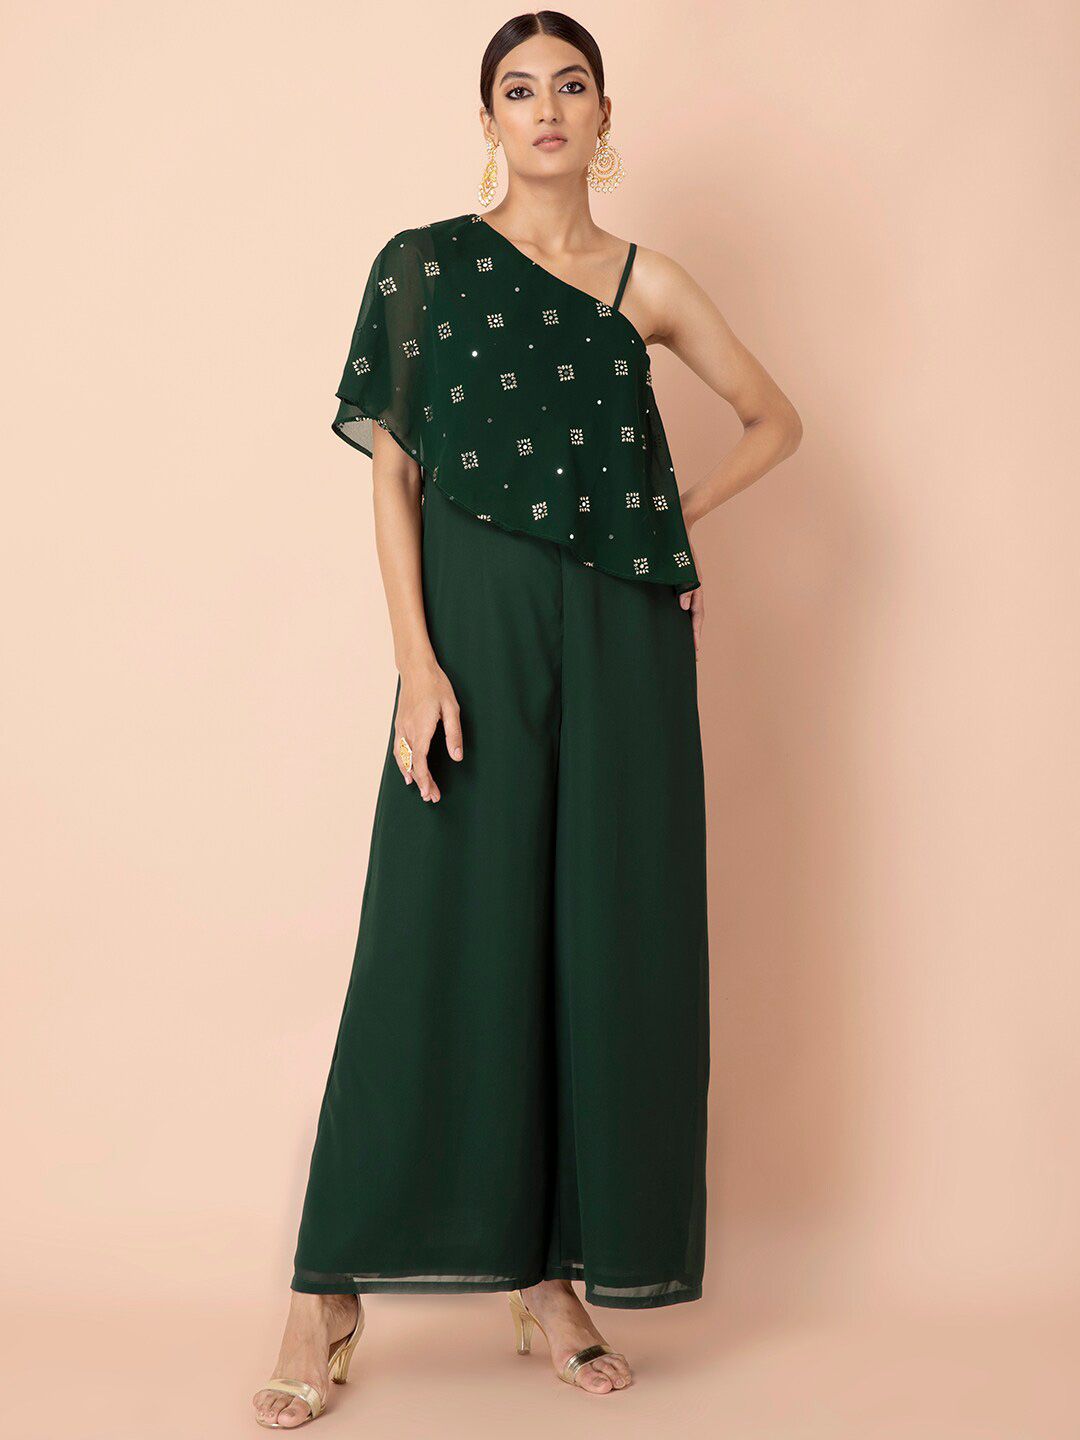 INDYA Green & Gold-Toned Printed Basic Jumpsuit Price in India